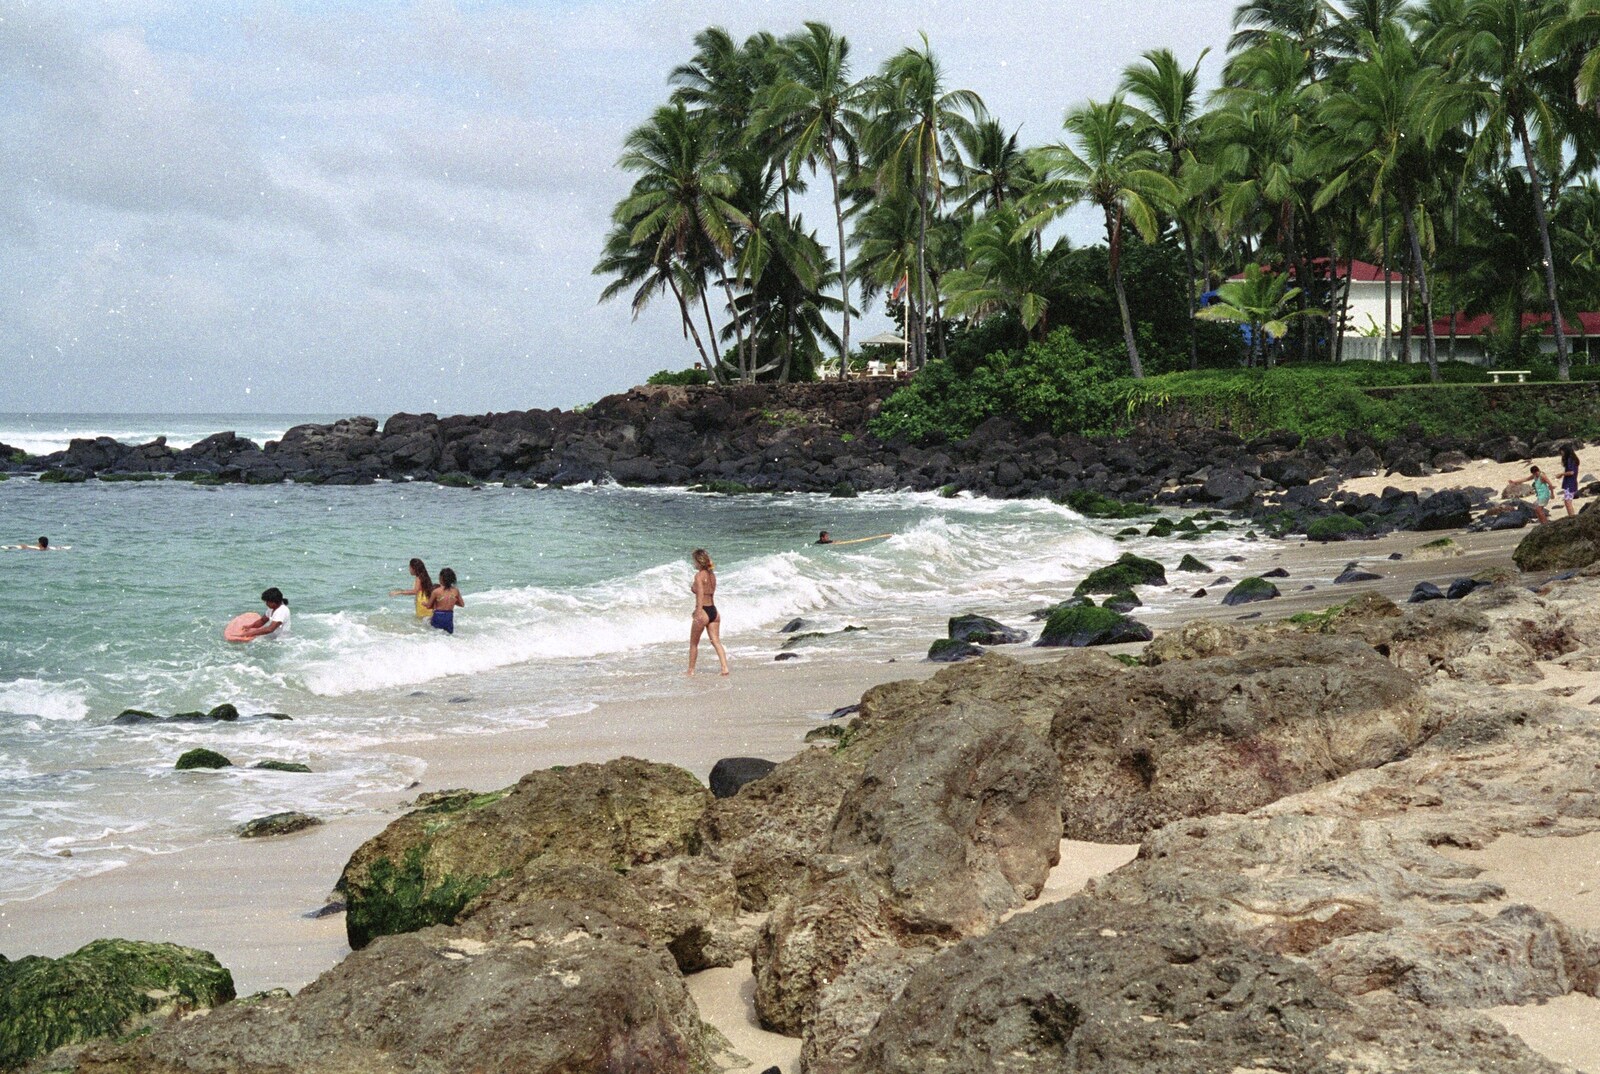 Surfers and swimmers on North Shore from A 747 Cockpit, Honolulu and Pearl Harbor, O'ahu, Hawai'i, United States - 20th November 1992